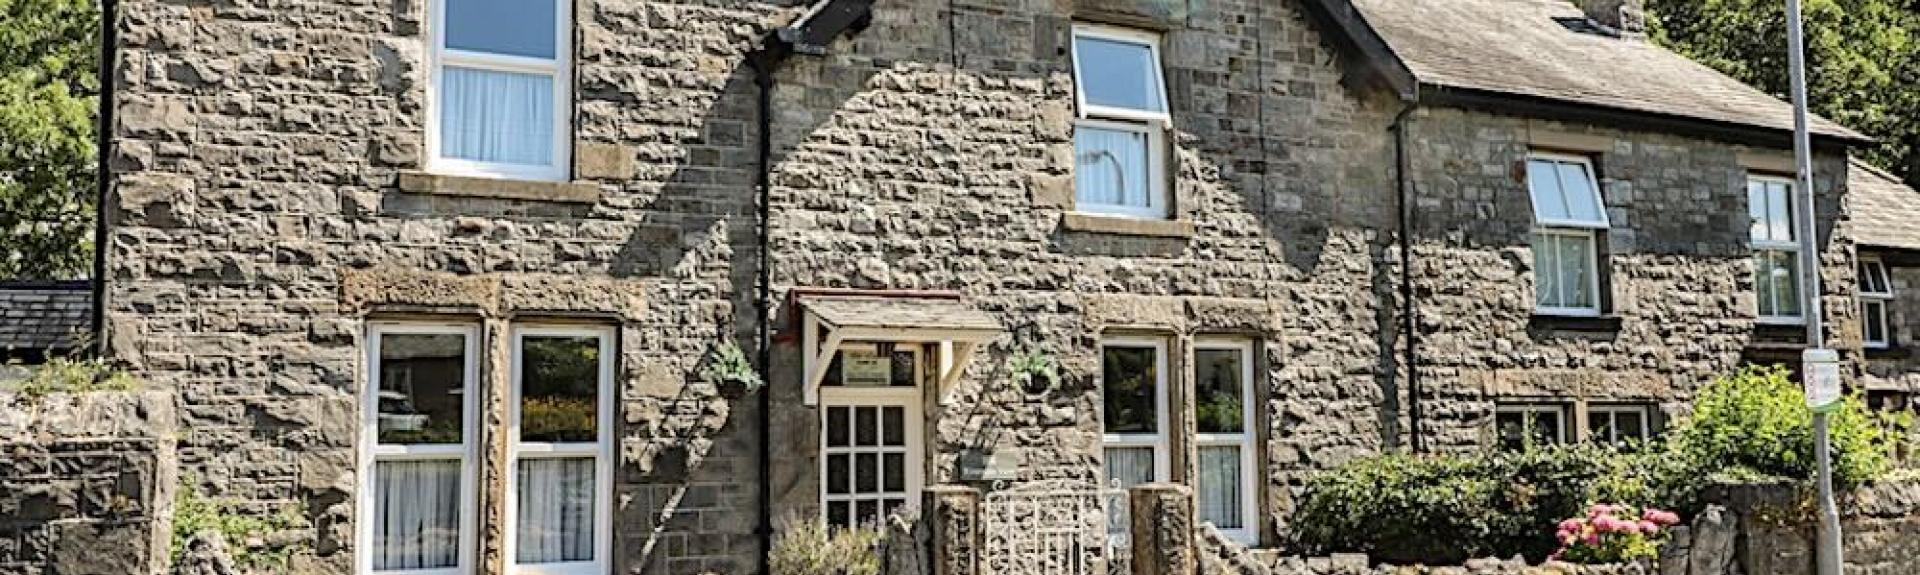 Stone-built Cumbrian holiday cottage with a front garden behind a low stone wall.